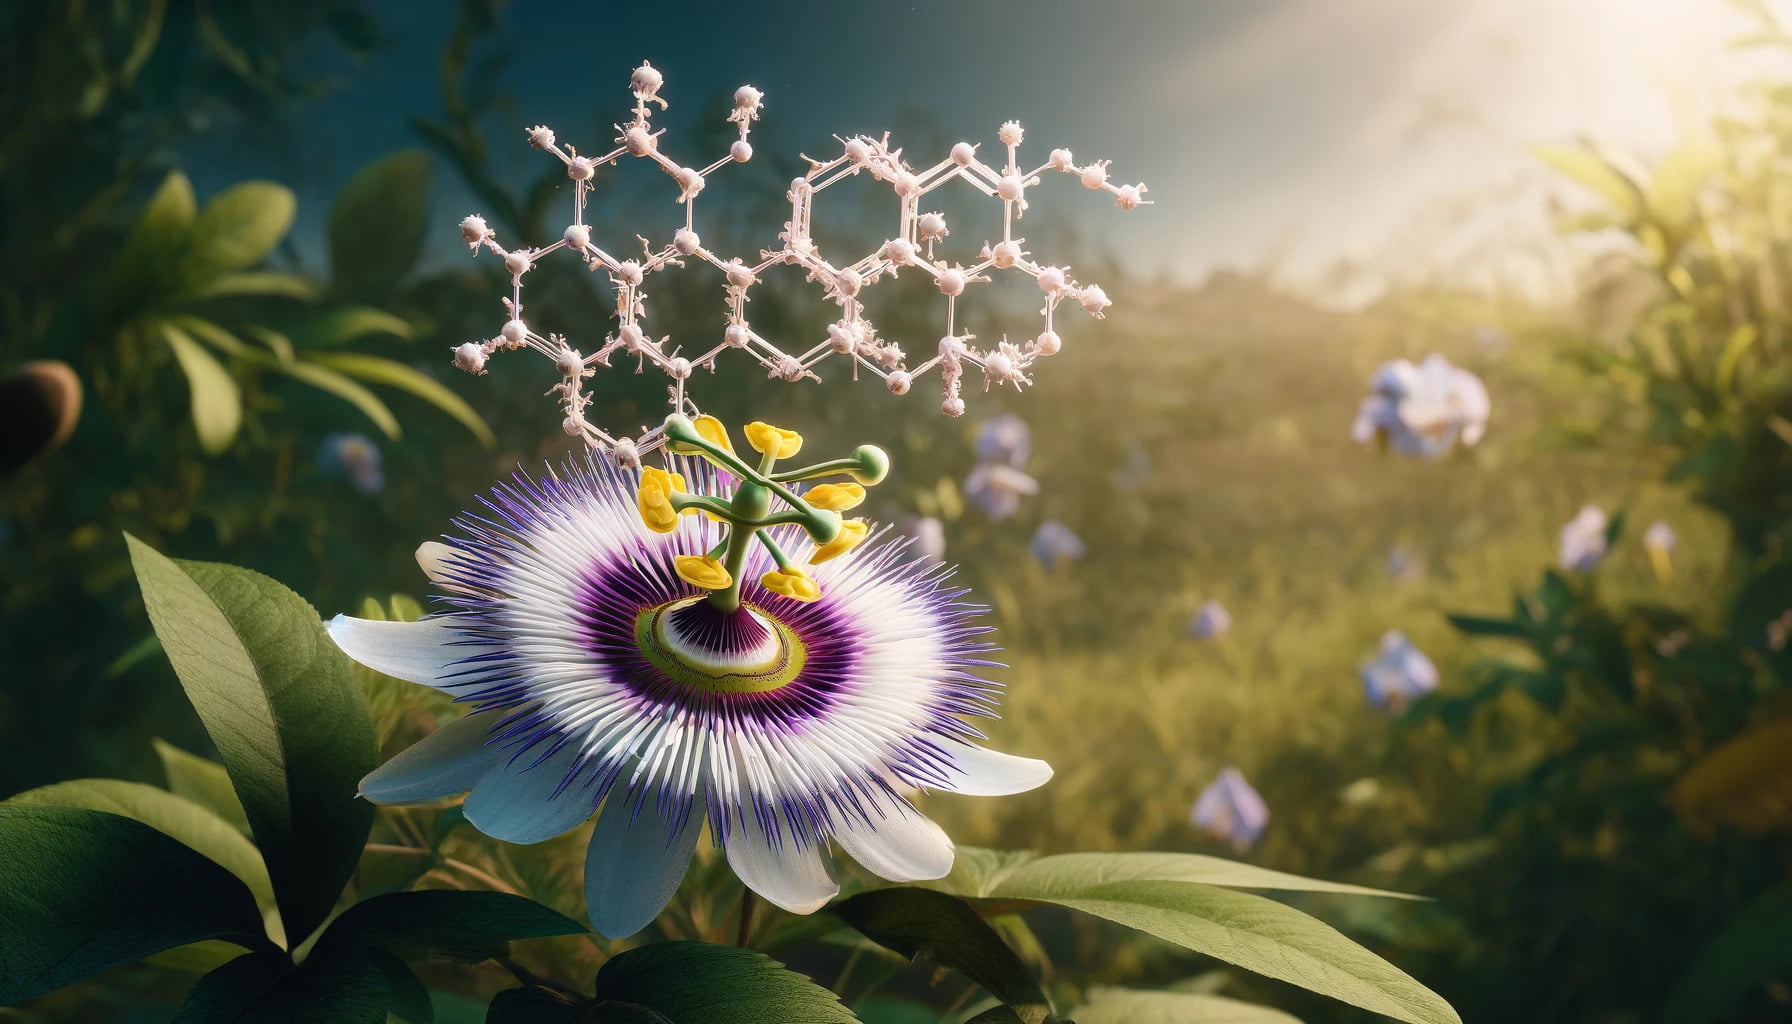  A photorealistic image of a passionflower in a landscape format, artistically incorporating its molecular structure.